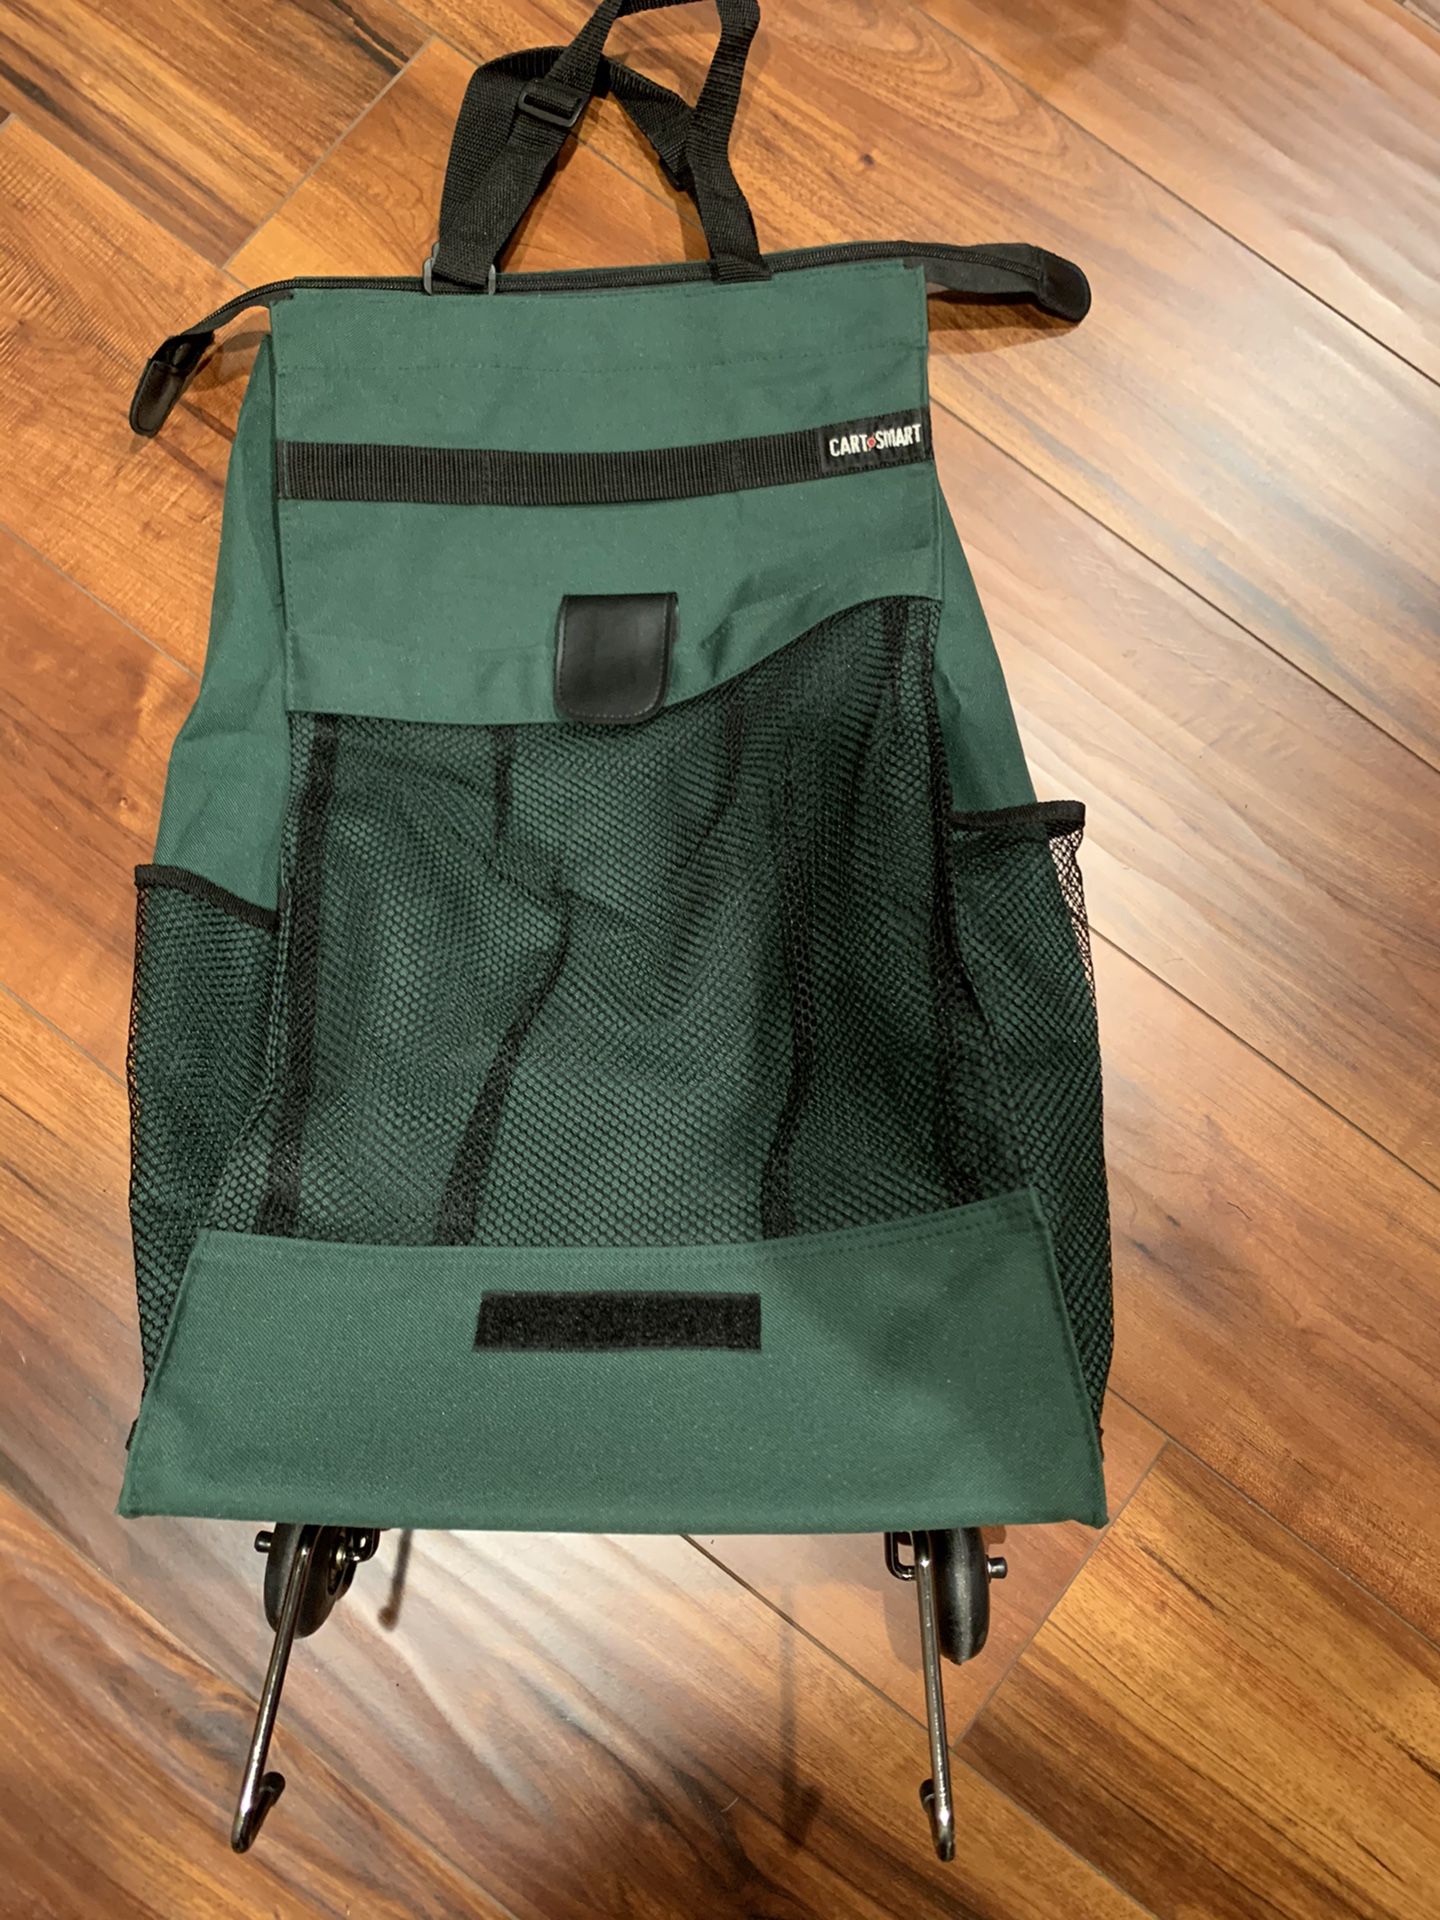 Rolling smart Tote!